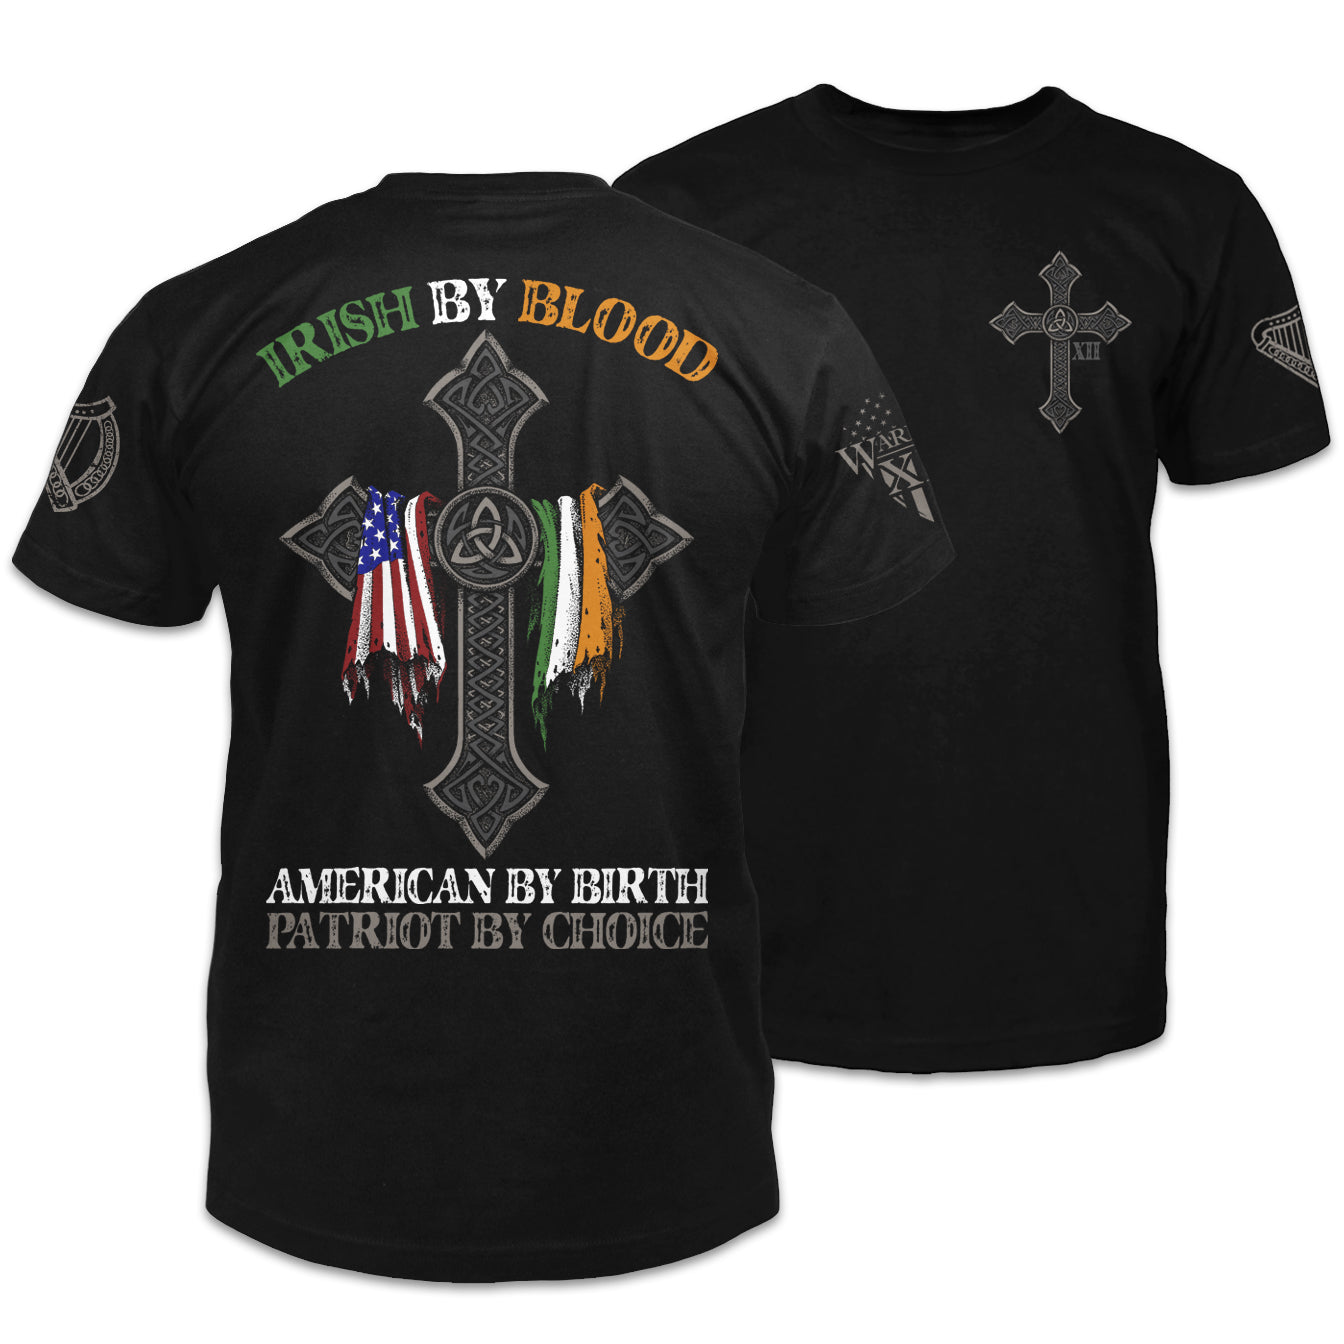 Front & back black t-shirt with the words "Irish by blood, American by birth, patriot by choice" with a cross holding an American and Irish flag printed on the shirt.